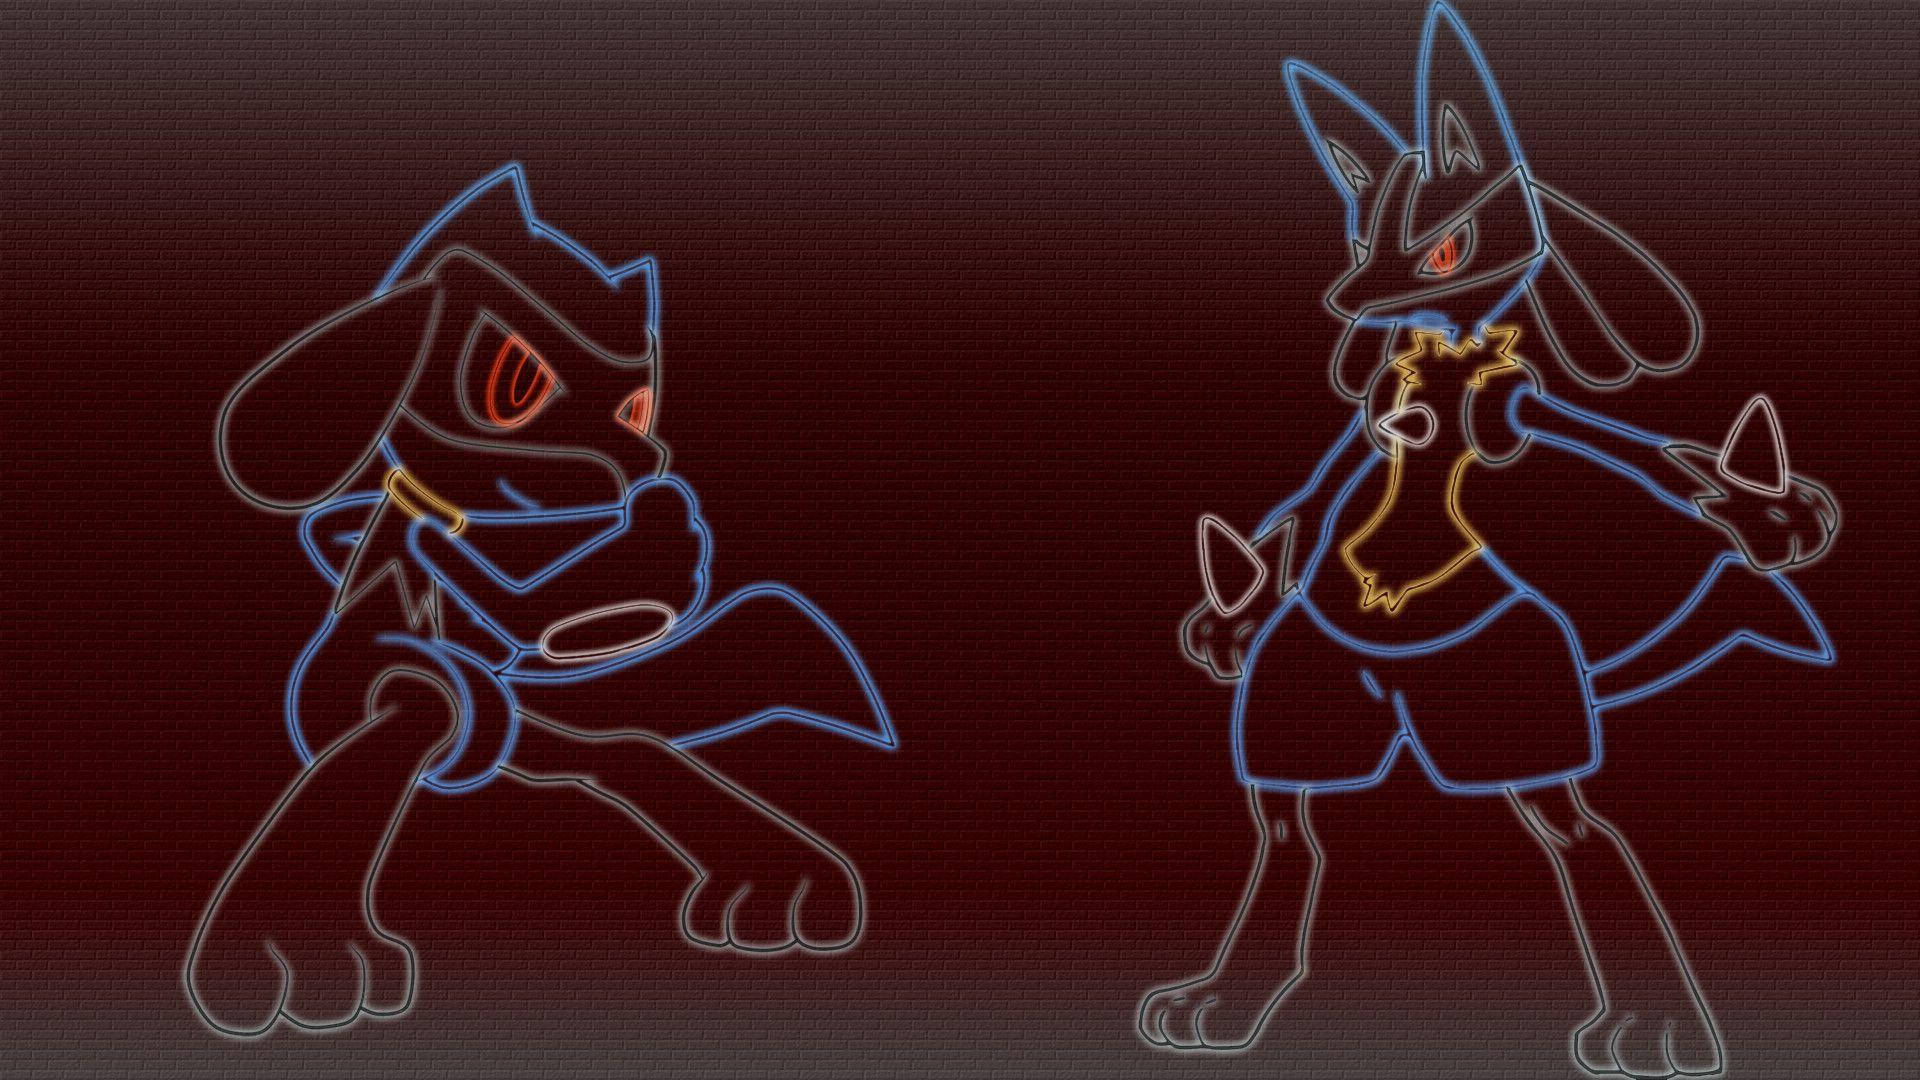 Riolu And Lucario Outlines Wallpaper